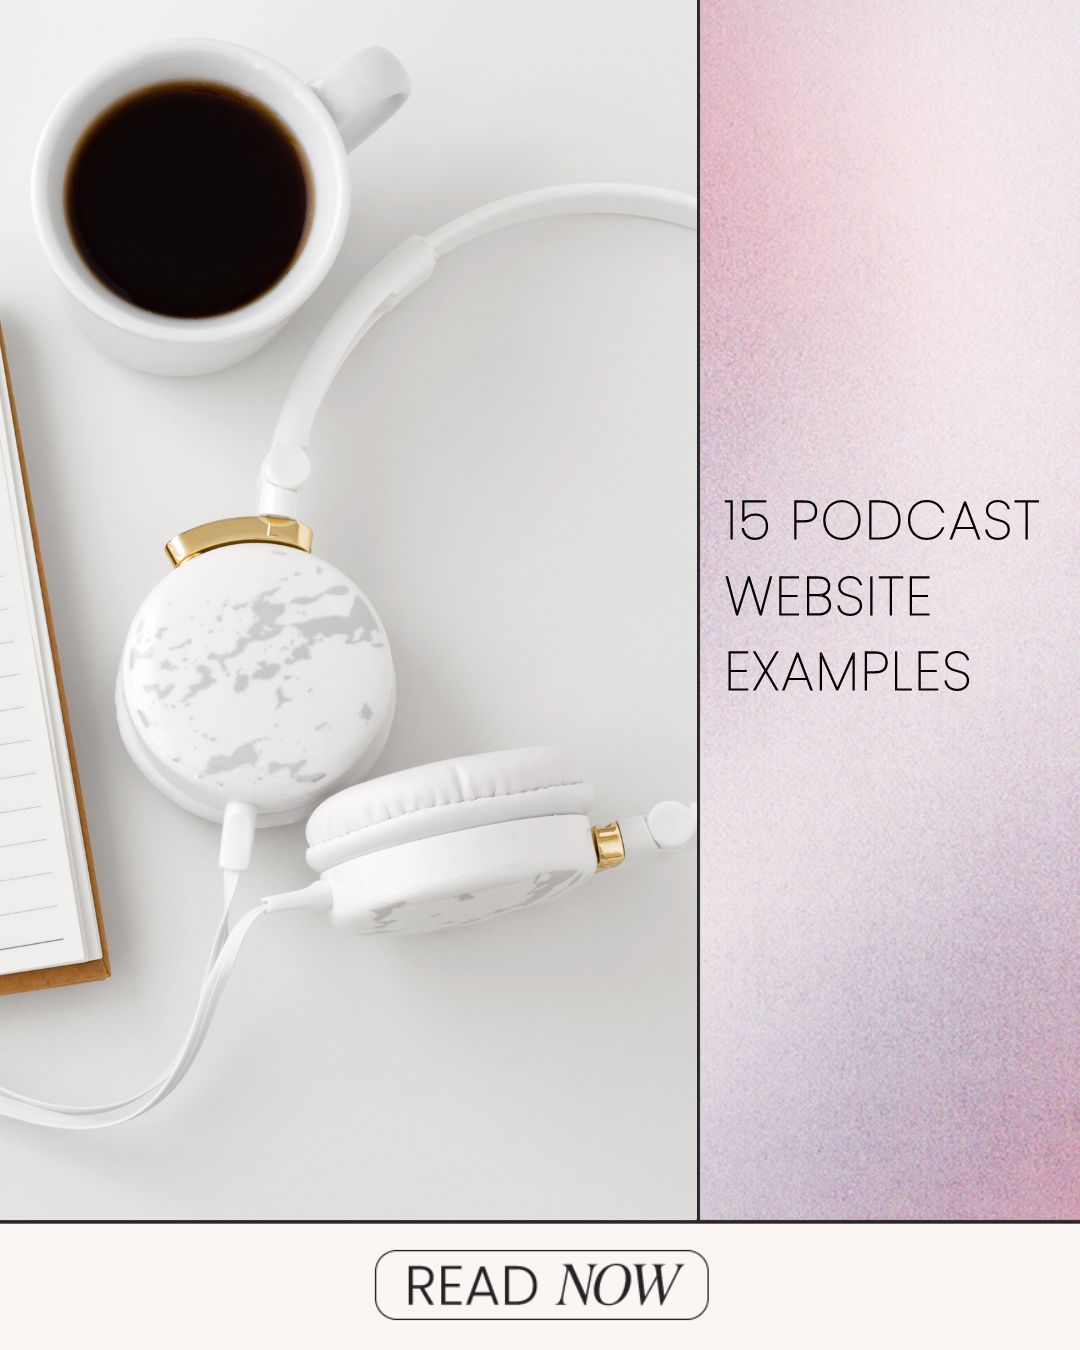 depiction of coffee cup, headphones, and laptop, with podcast website examples written in black